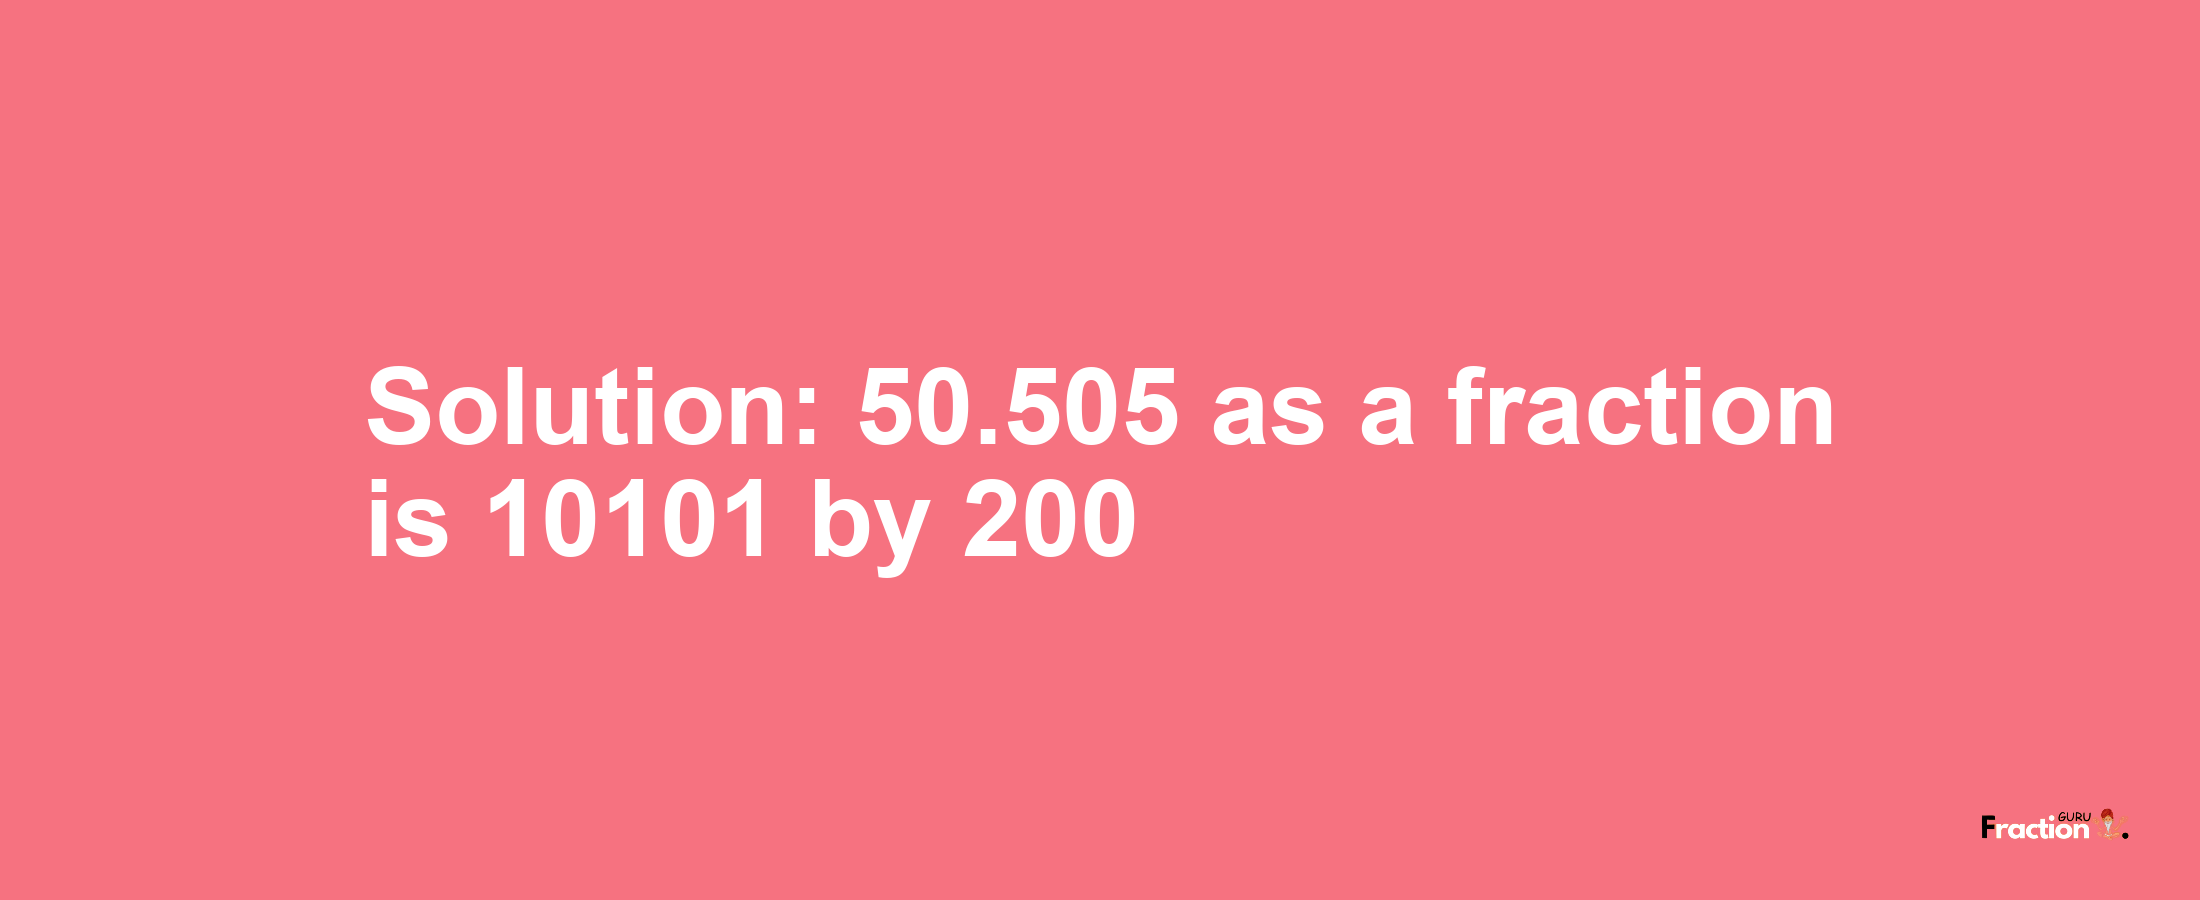 Solution:50.505 as a fraction is 10101/200